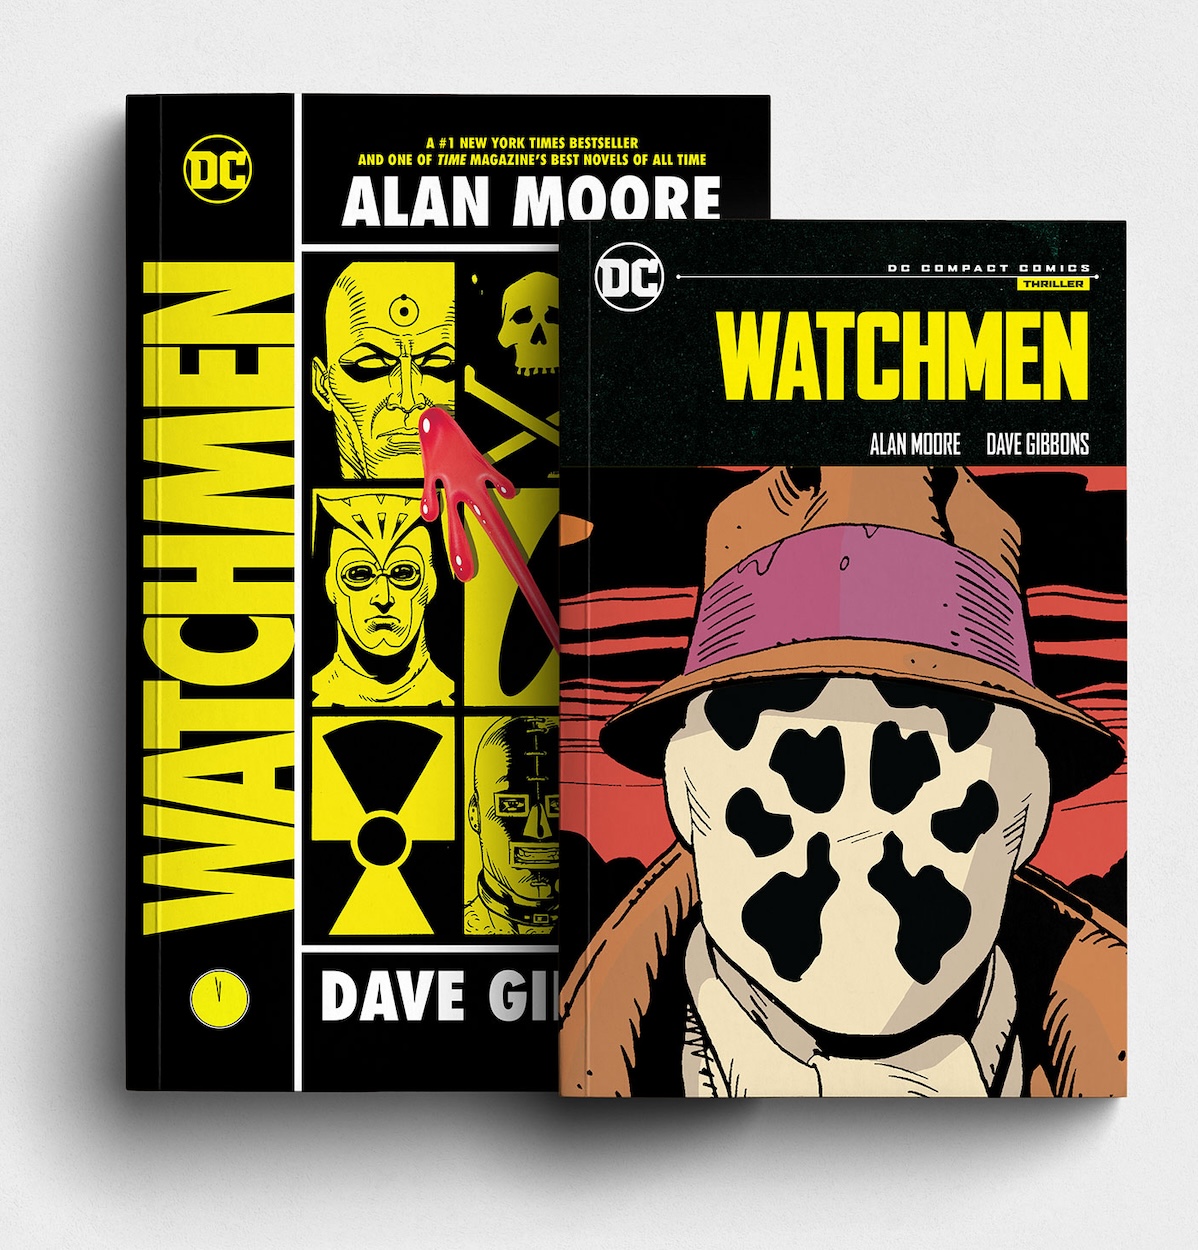 Watchmen collection compared to DC Compact Comics edition